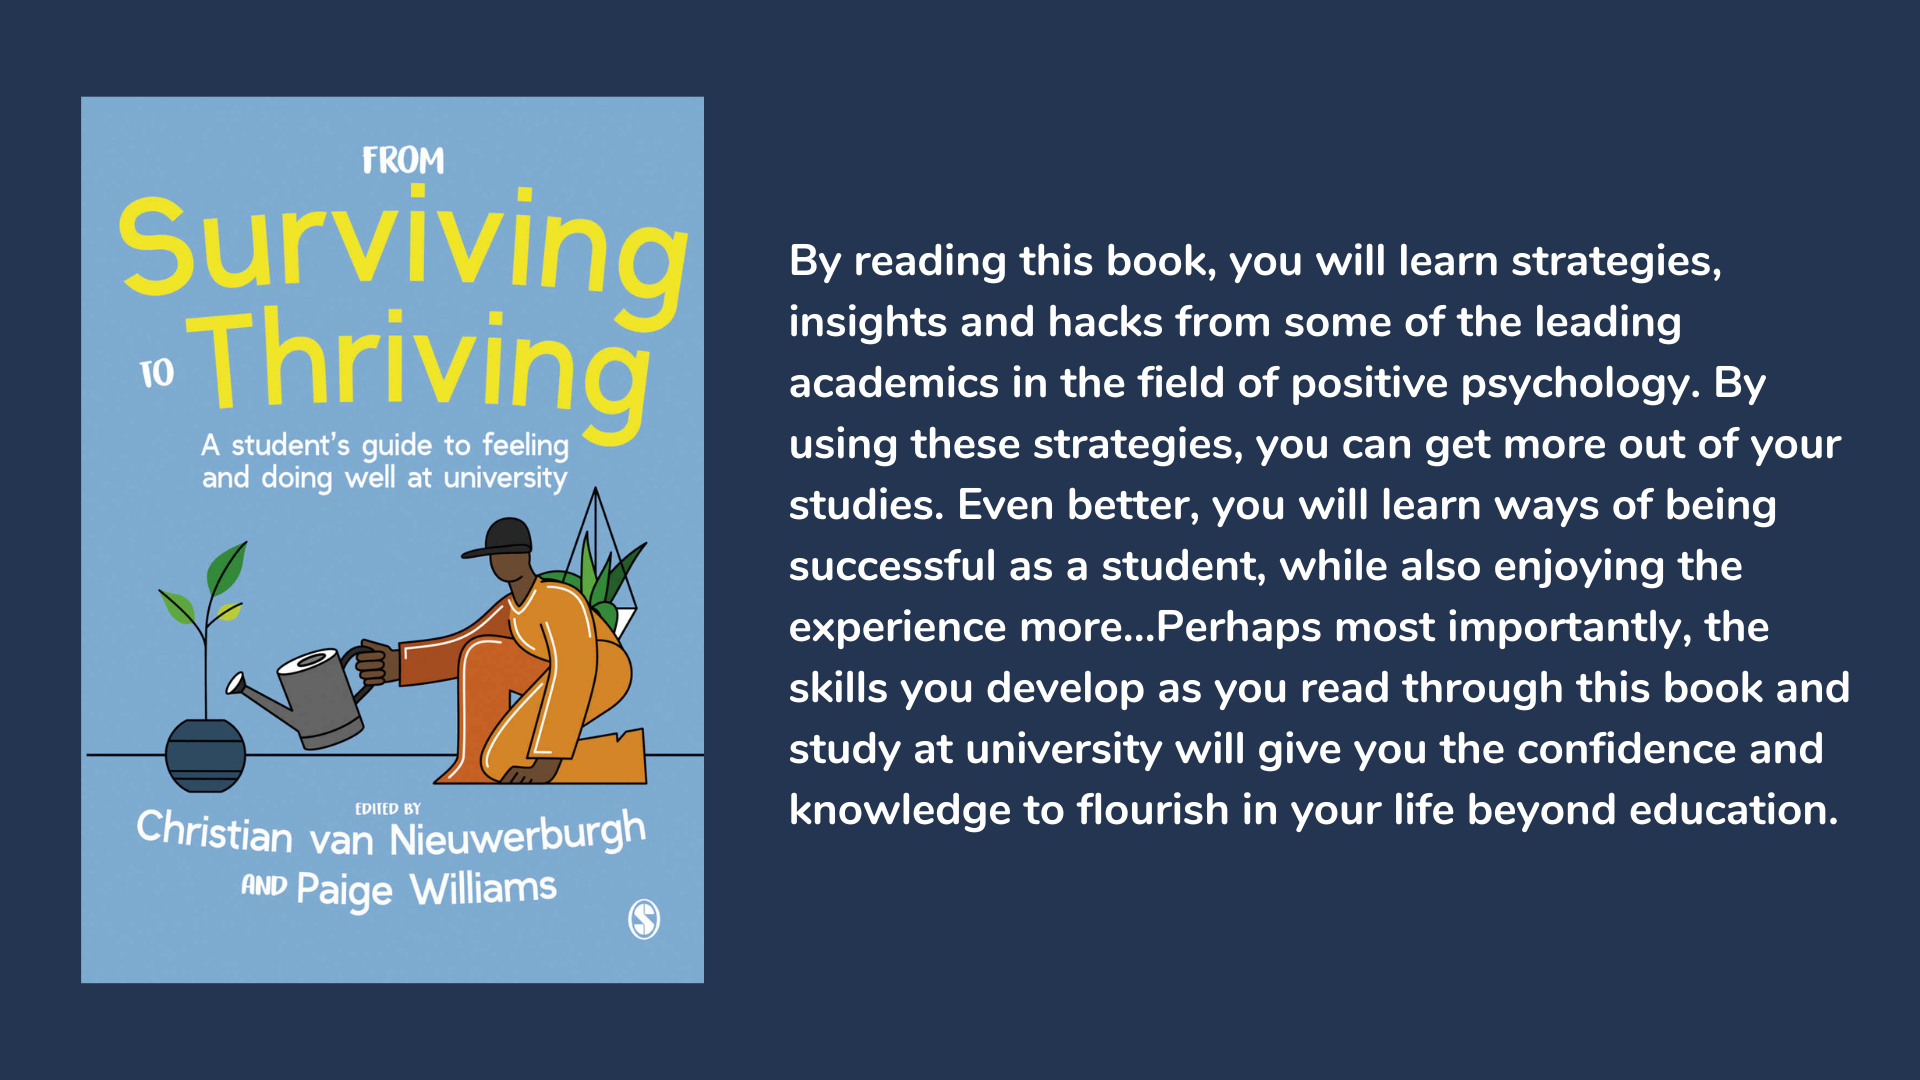 From Surviving to Thriving: A Student's Guide to Feeling and Doing well at University, book cover and description.